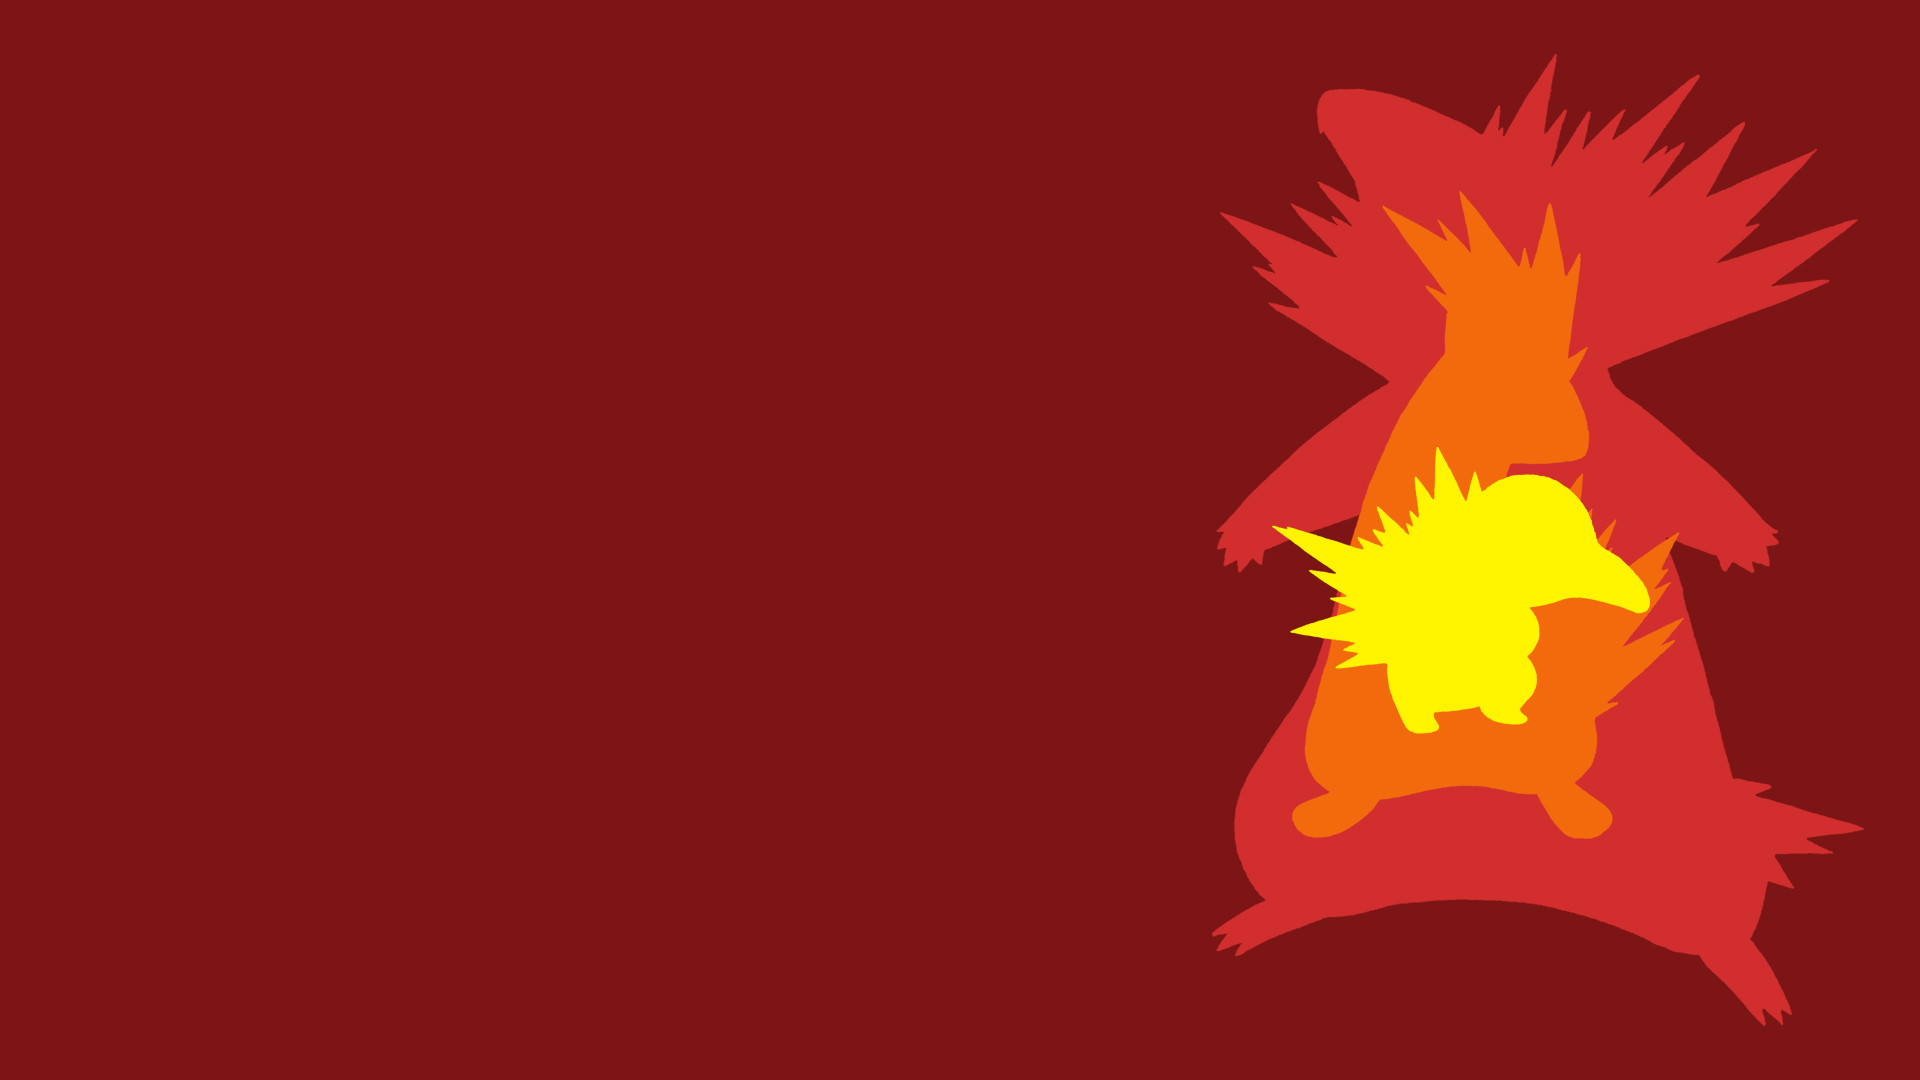 1920x1080 Cyndaquil Evolution Line Minimalist Wallpaper by BrulesCorrupted